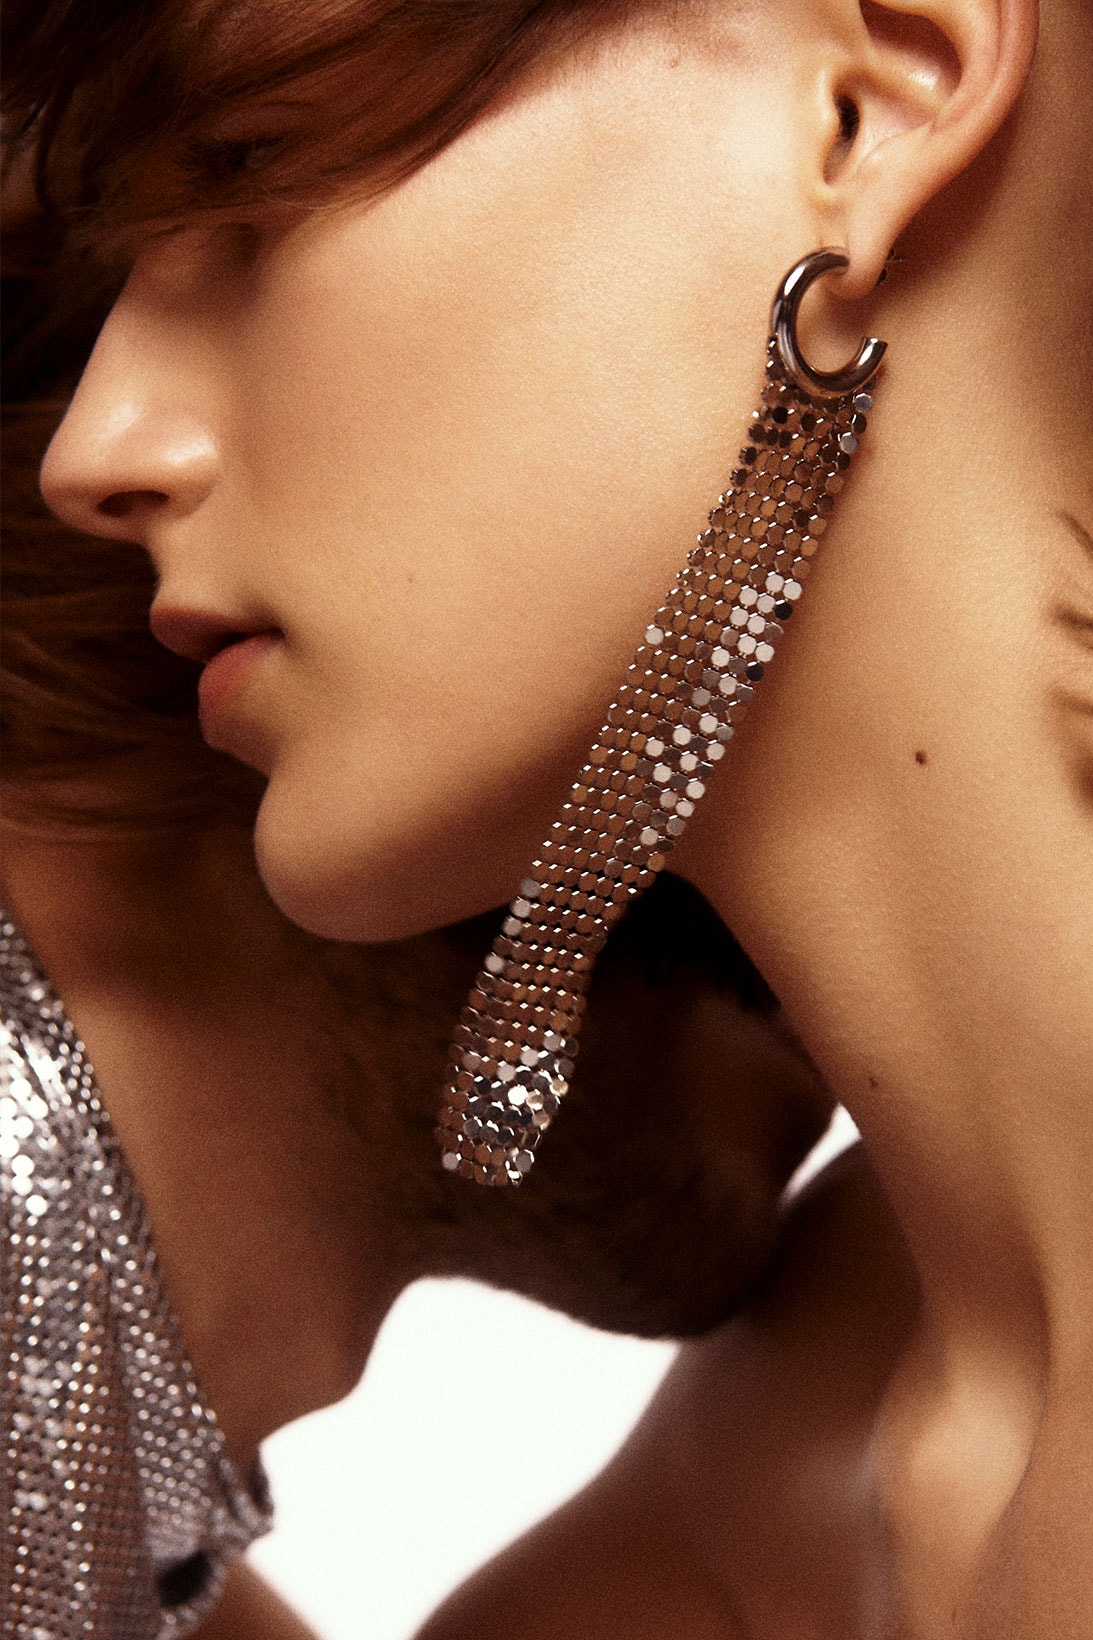 paco rabanne build love valentines day accessories collection chainmail earring jewelry